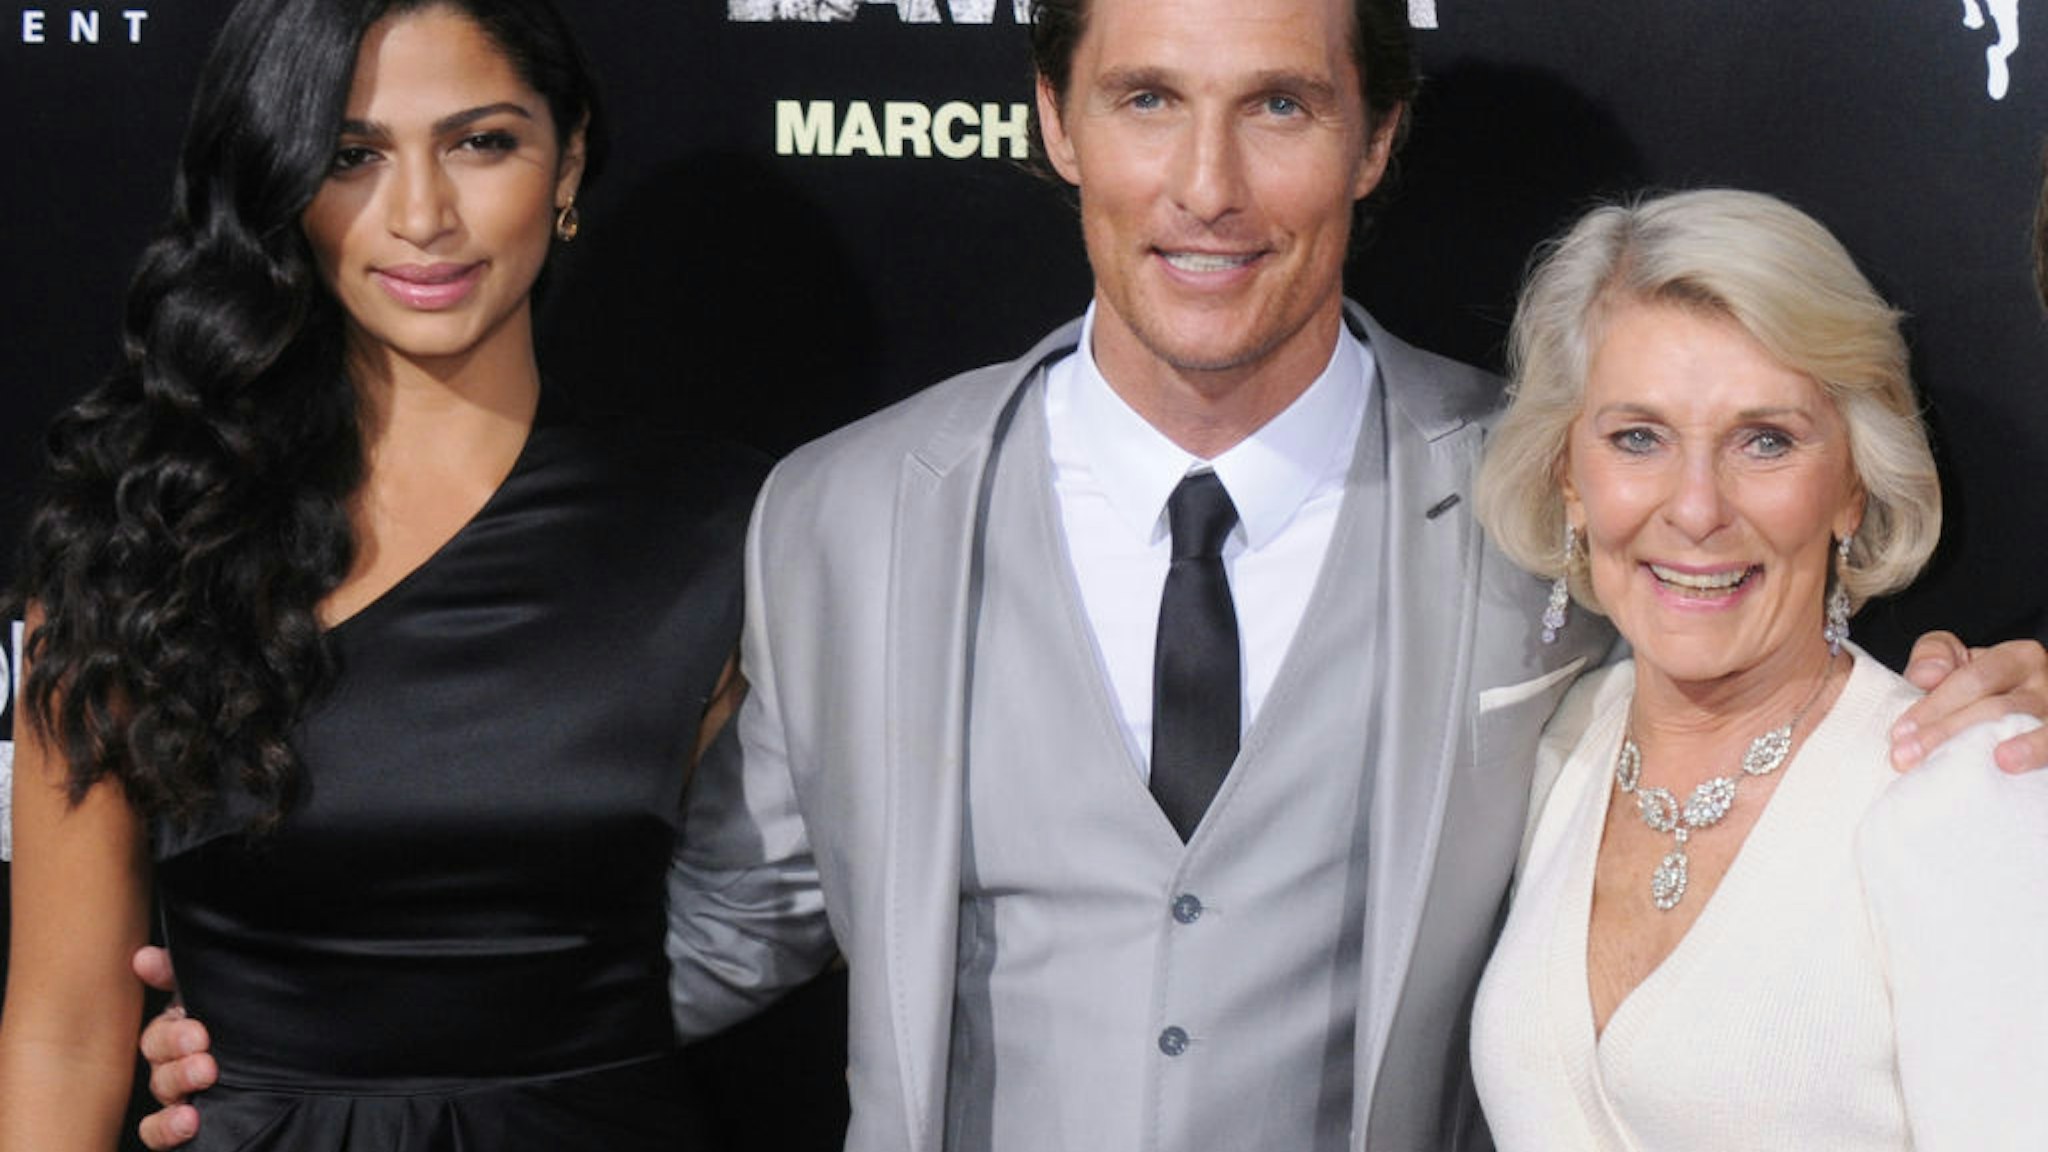 HOLLYWOOD, CA - MARCH 10: Camila Alves, Matthew McConaughey and mom Mary Kathleen McCabe arrive at the Los Angeles Premiere of "The Lincoln Lawyer" at the ArcLight Hollywood on March 10, 2011 in Hollywood, California. (Photo by Gregg DeGuire/FilmMagic)